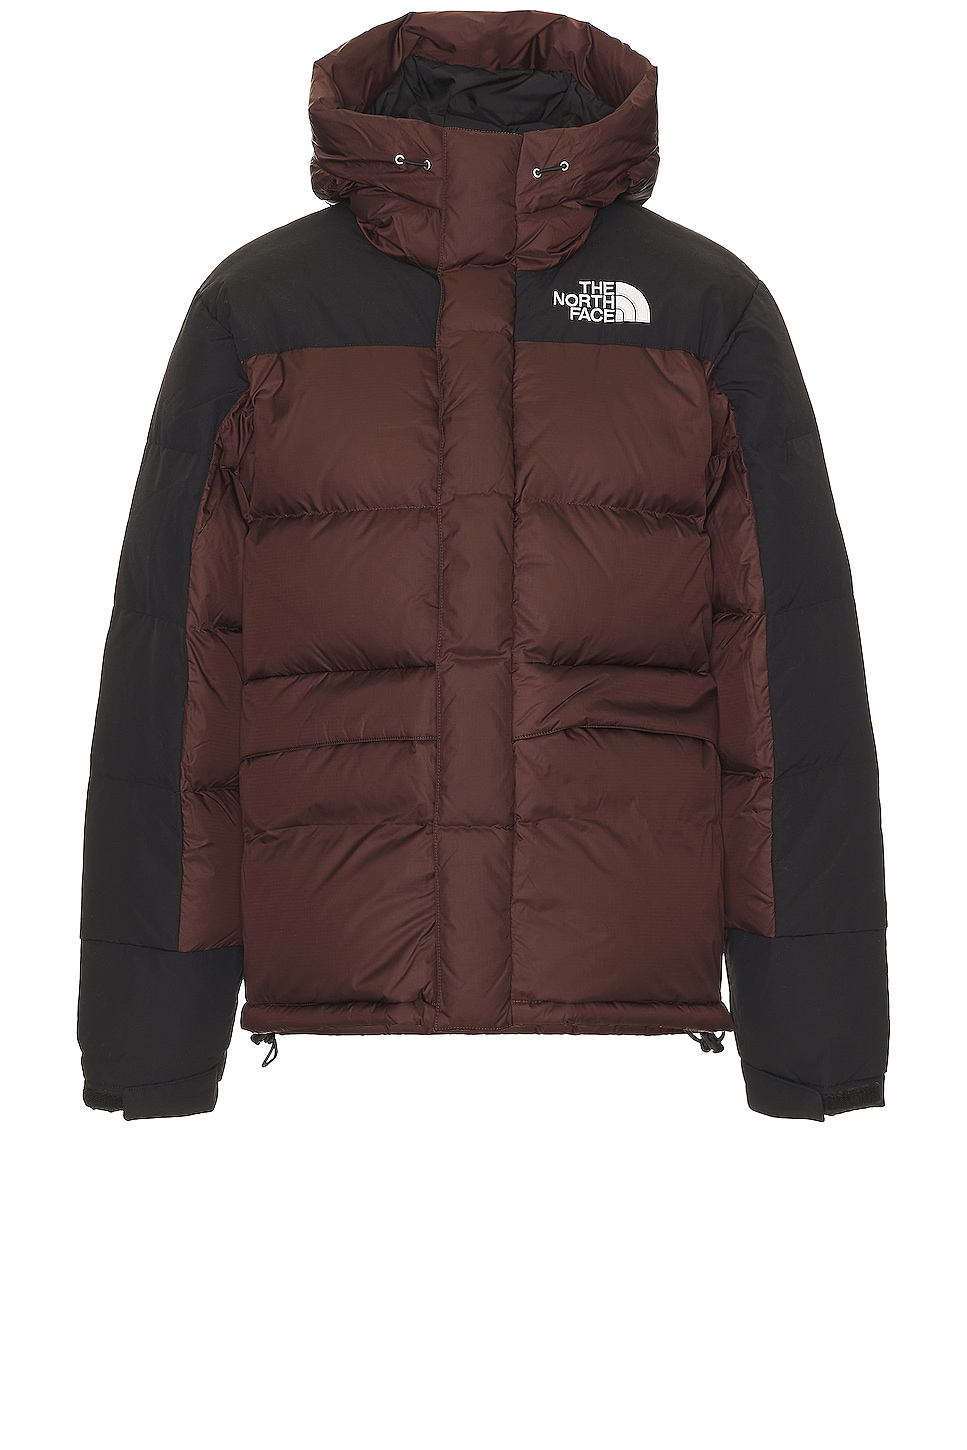 Image 1 of The North Face Hmlyn Down Parka in Coal Brown & Tnf Black